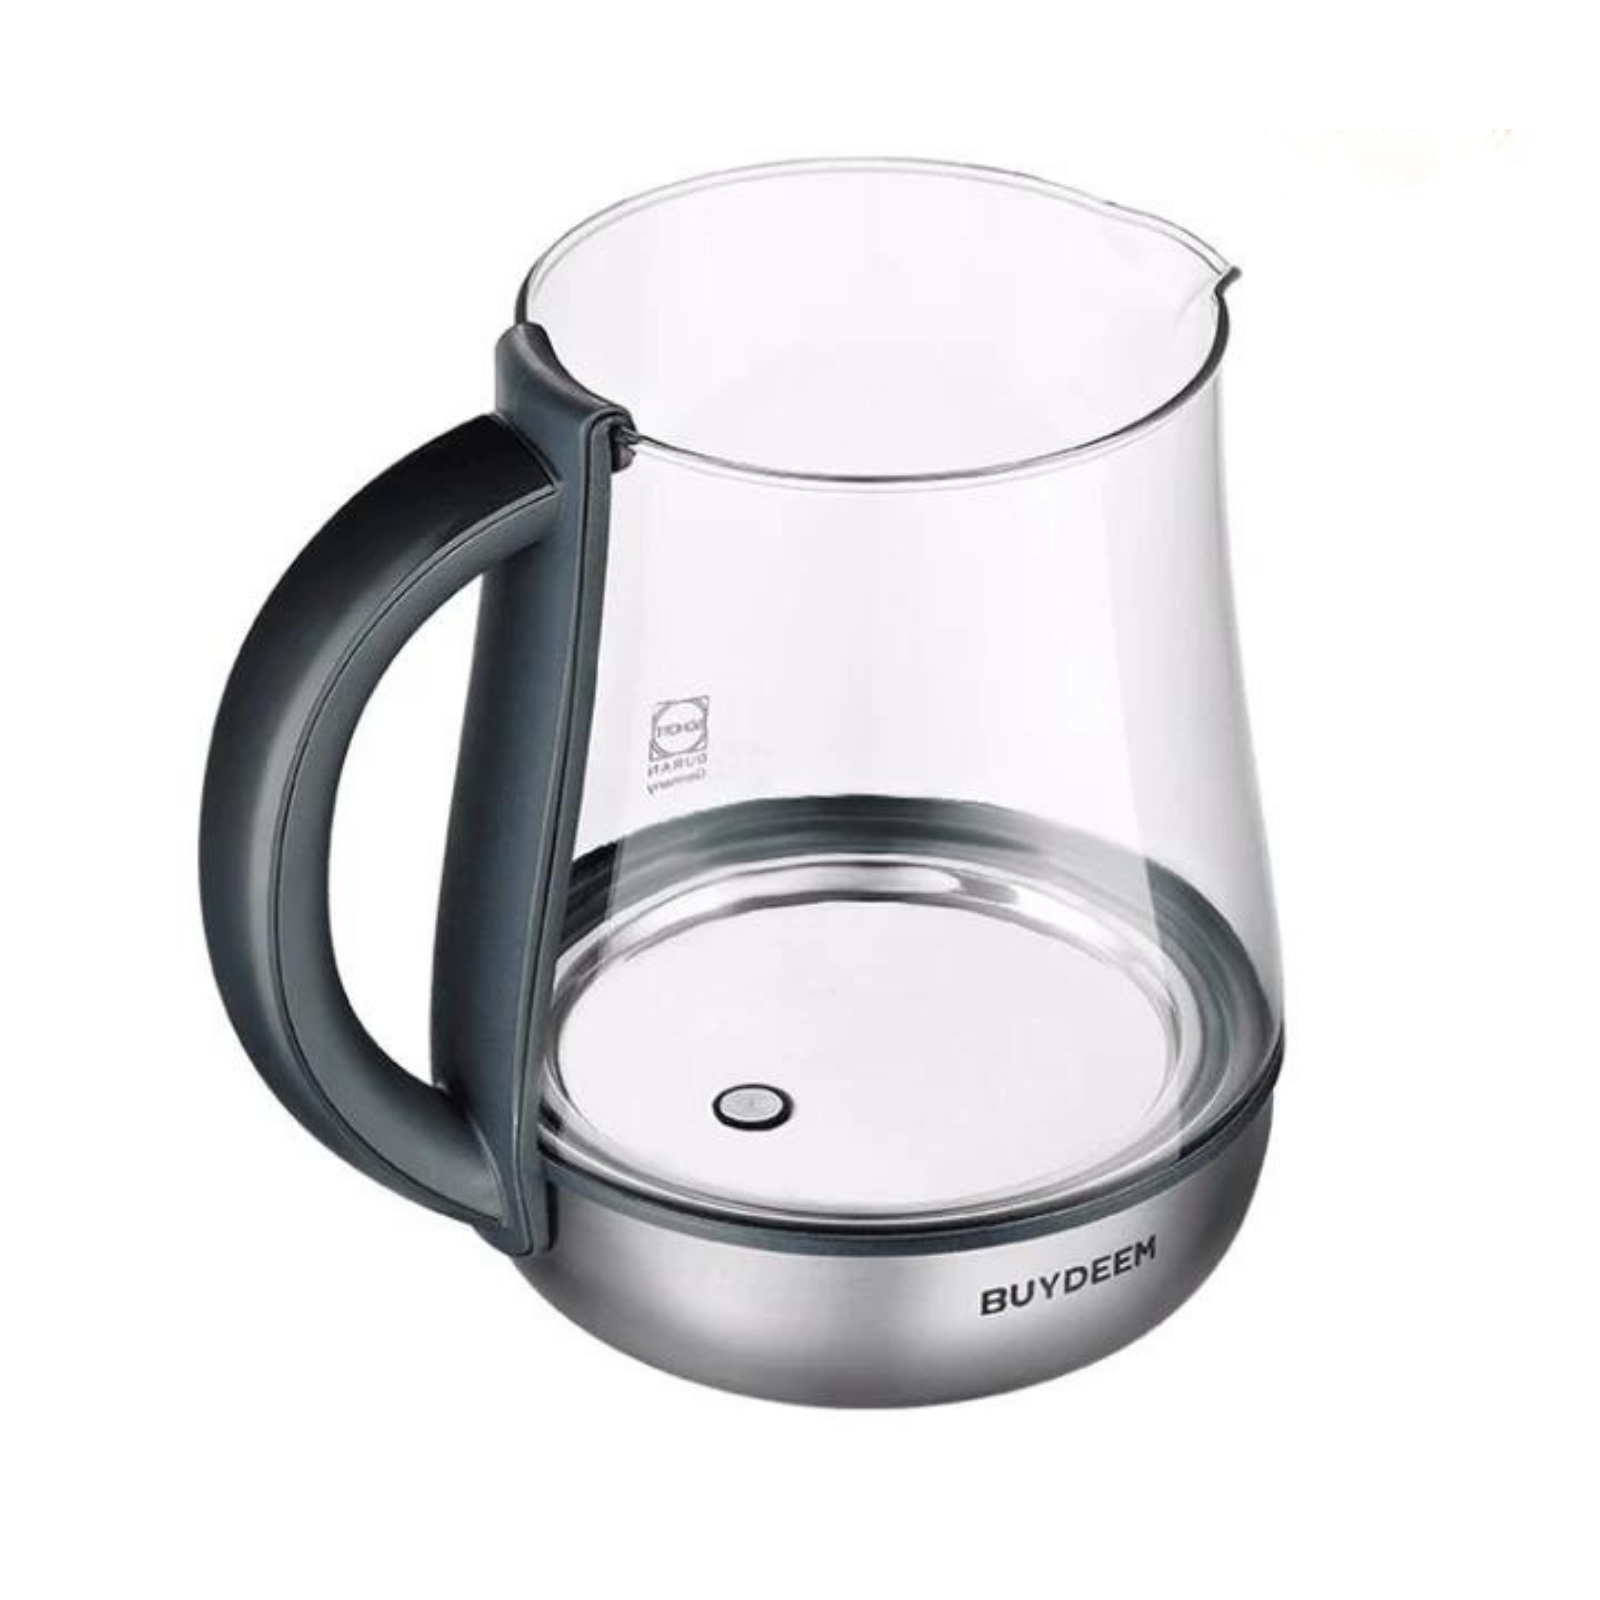 .com Buydeem K640 Stainless Steel Electric Tea Kettle with Auto  Shut-Off and Boil Dry Protection, 1.7 Liter Cordless Hot Water Boiler with  Swivel Base, 1440W, Mellow Yellow $62.99